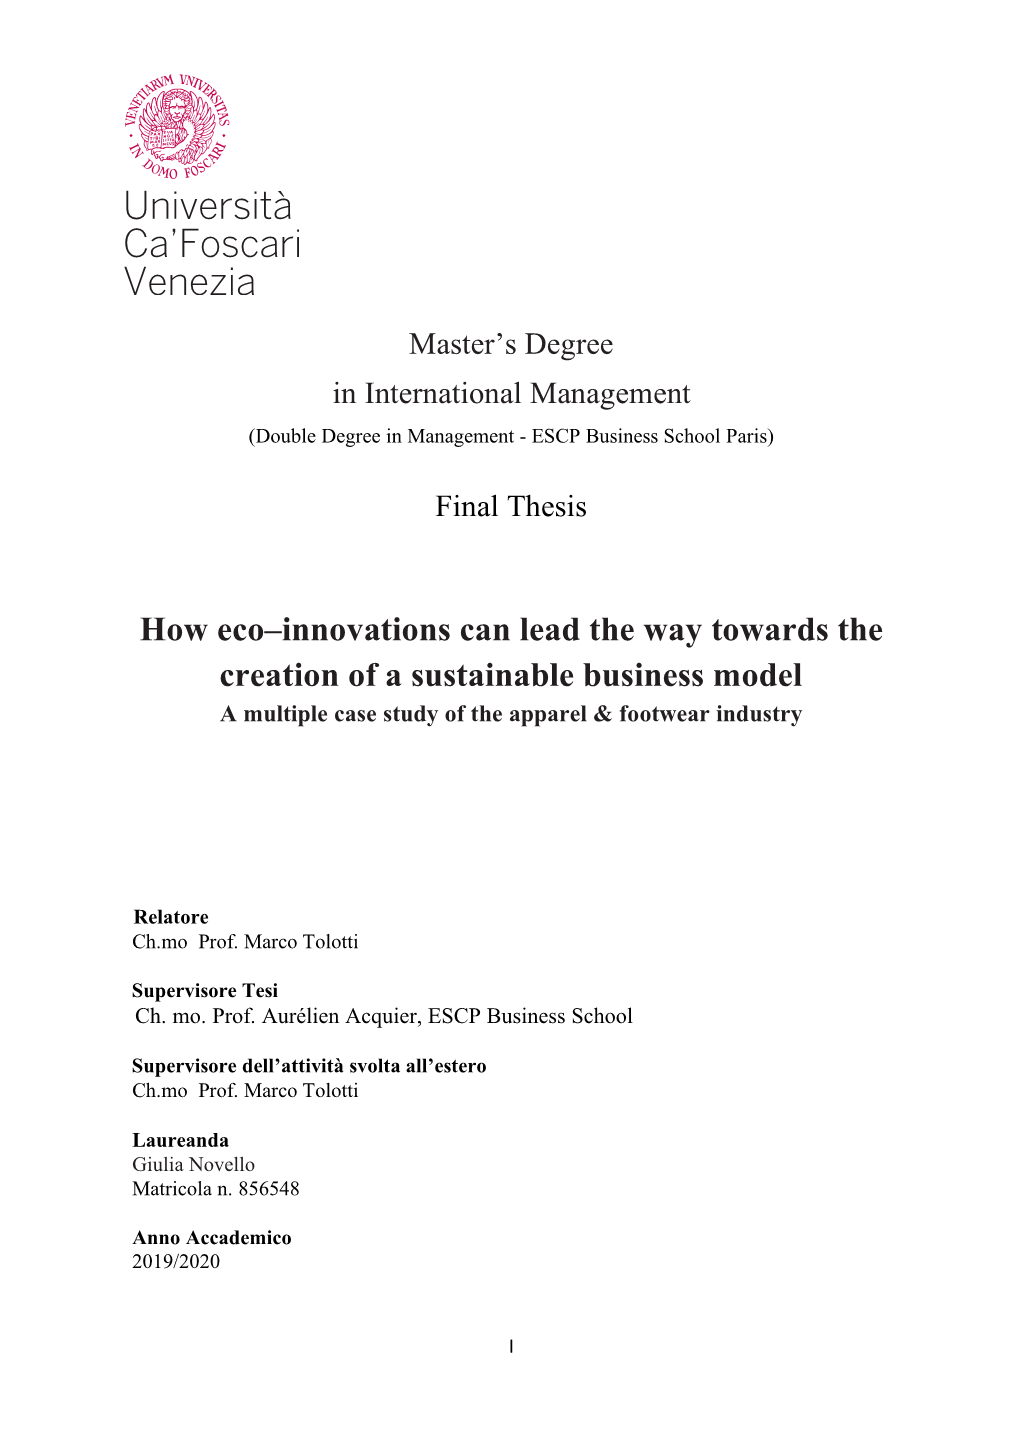 How Eco–Innovations Can Lead the Way Towards the Creation of a Sustainable Business Model a Multiple Case Study of the Apparel & Footwear Industry